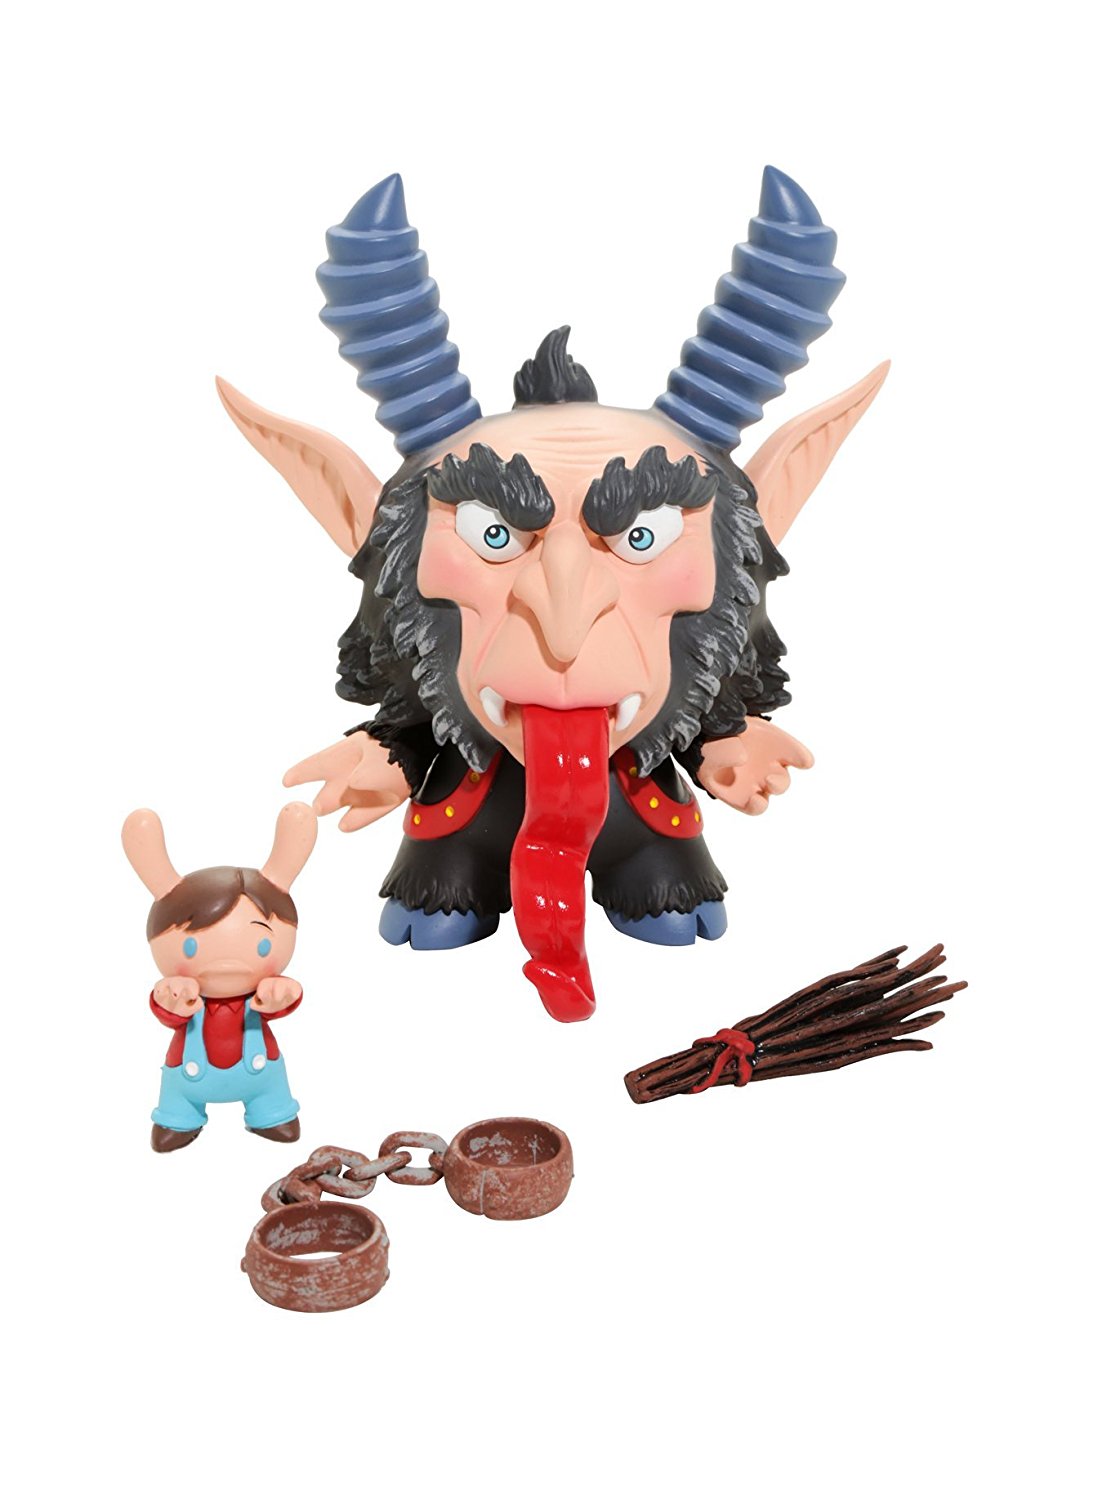 Krampus 5" Dunny by Scott Tolleson- Brown Colorway - Collectors Row Inc.